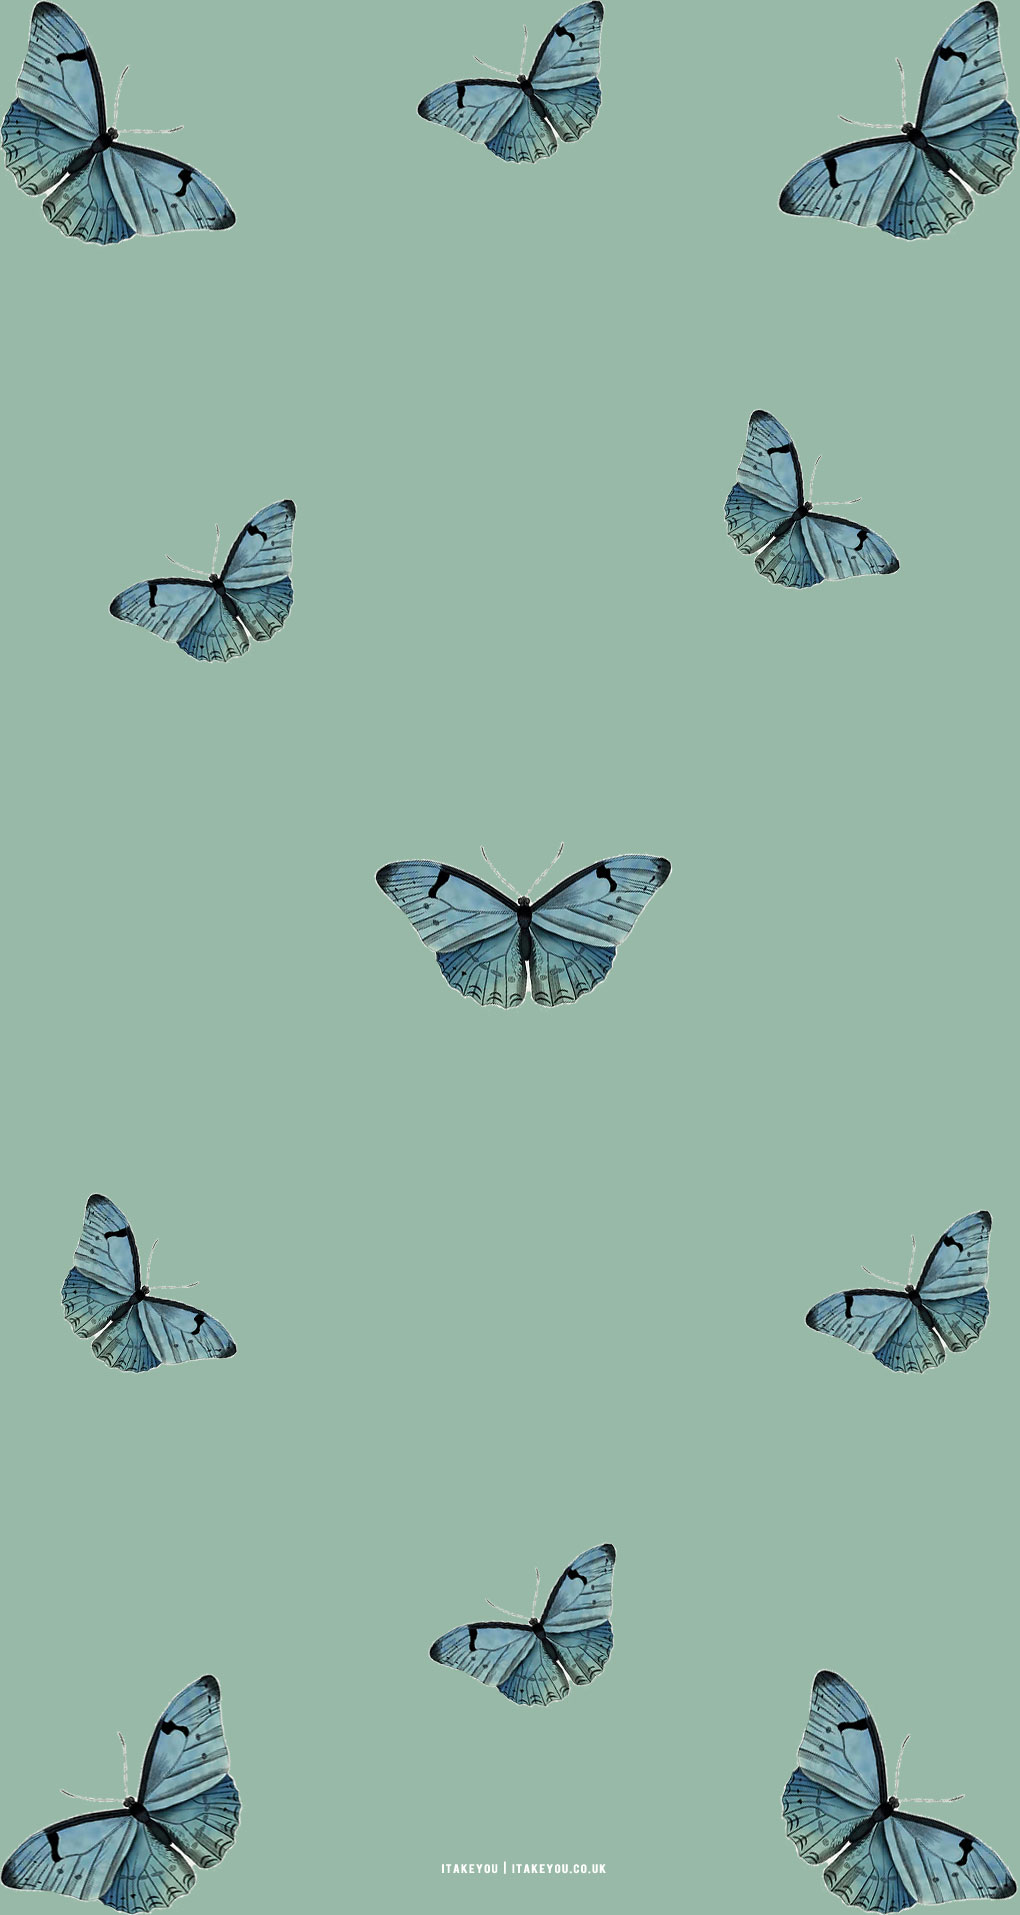 40  Whimsical Butterfly Wallpapers for iPhone  The Mood Guide